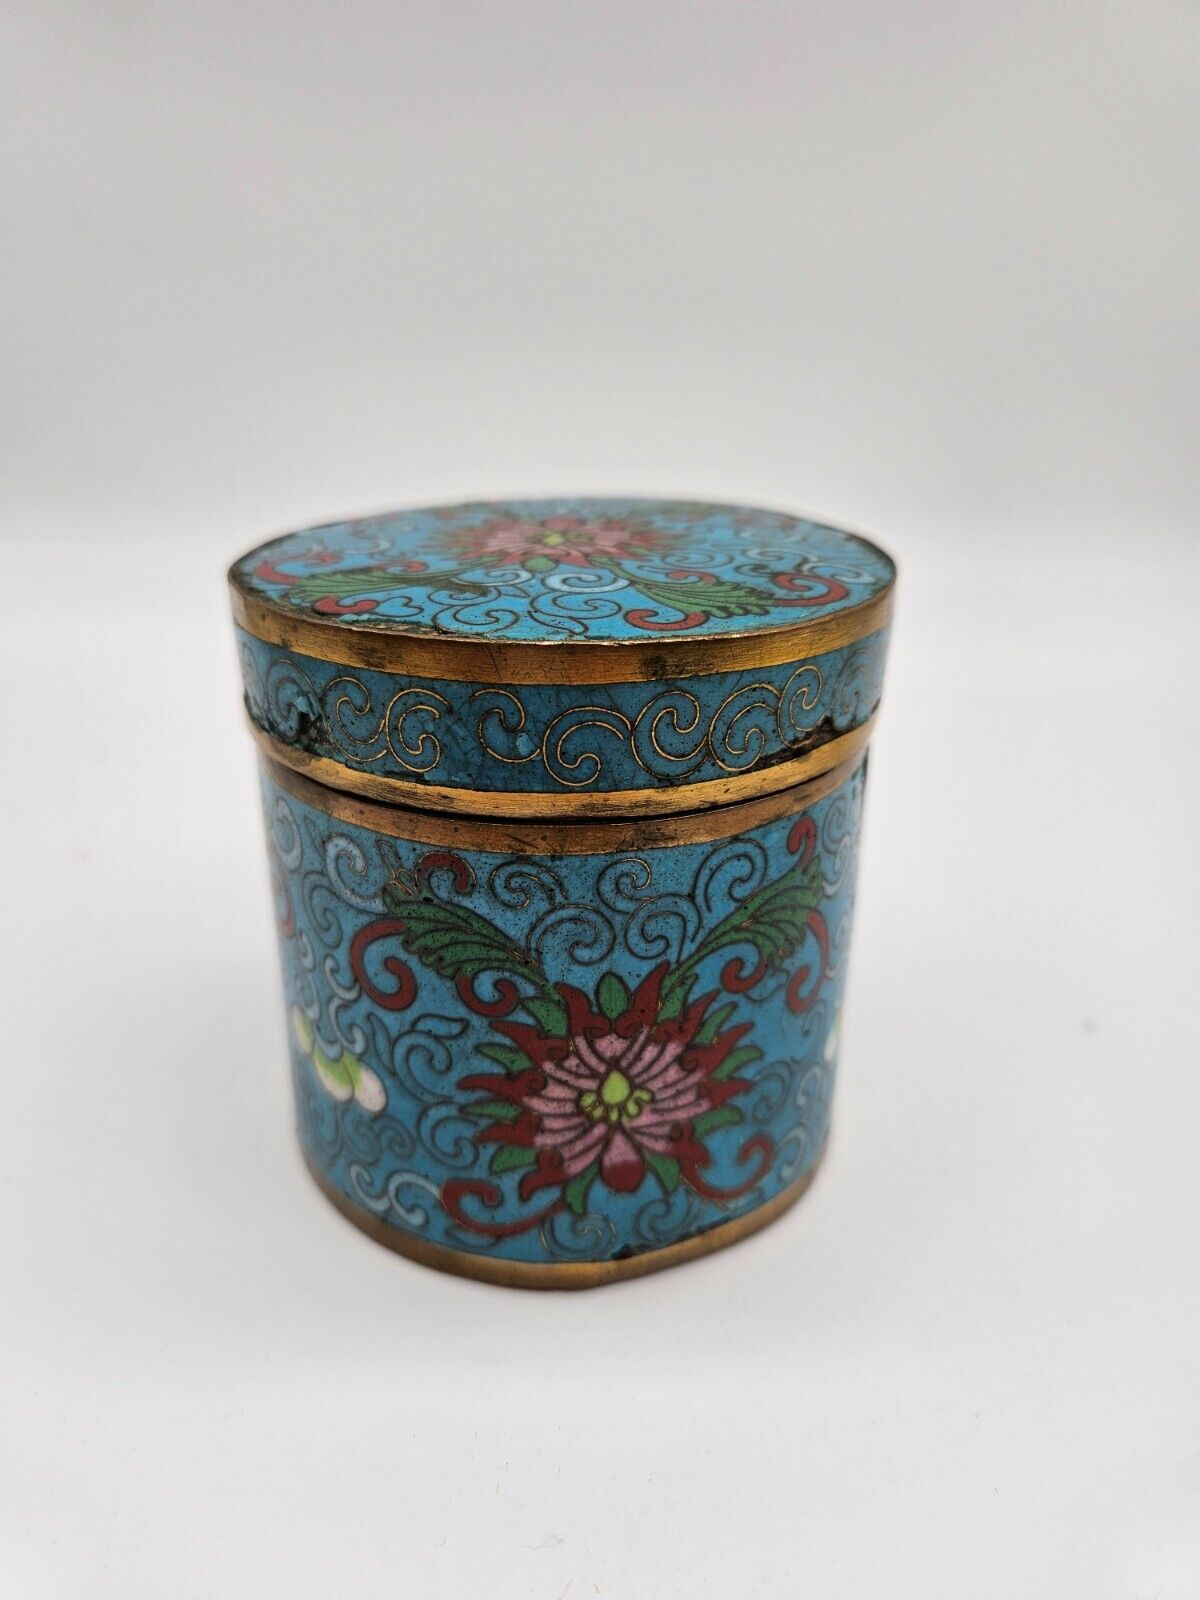 Vintage Chinese Round Cloisonné Small Cannister w/Flowers, Shows Wear